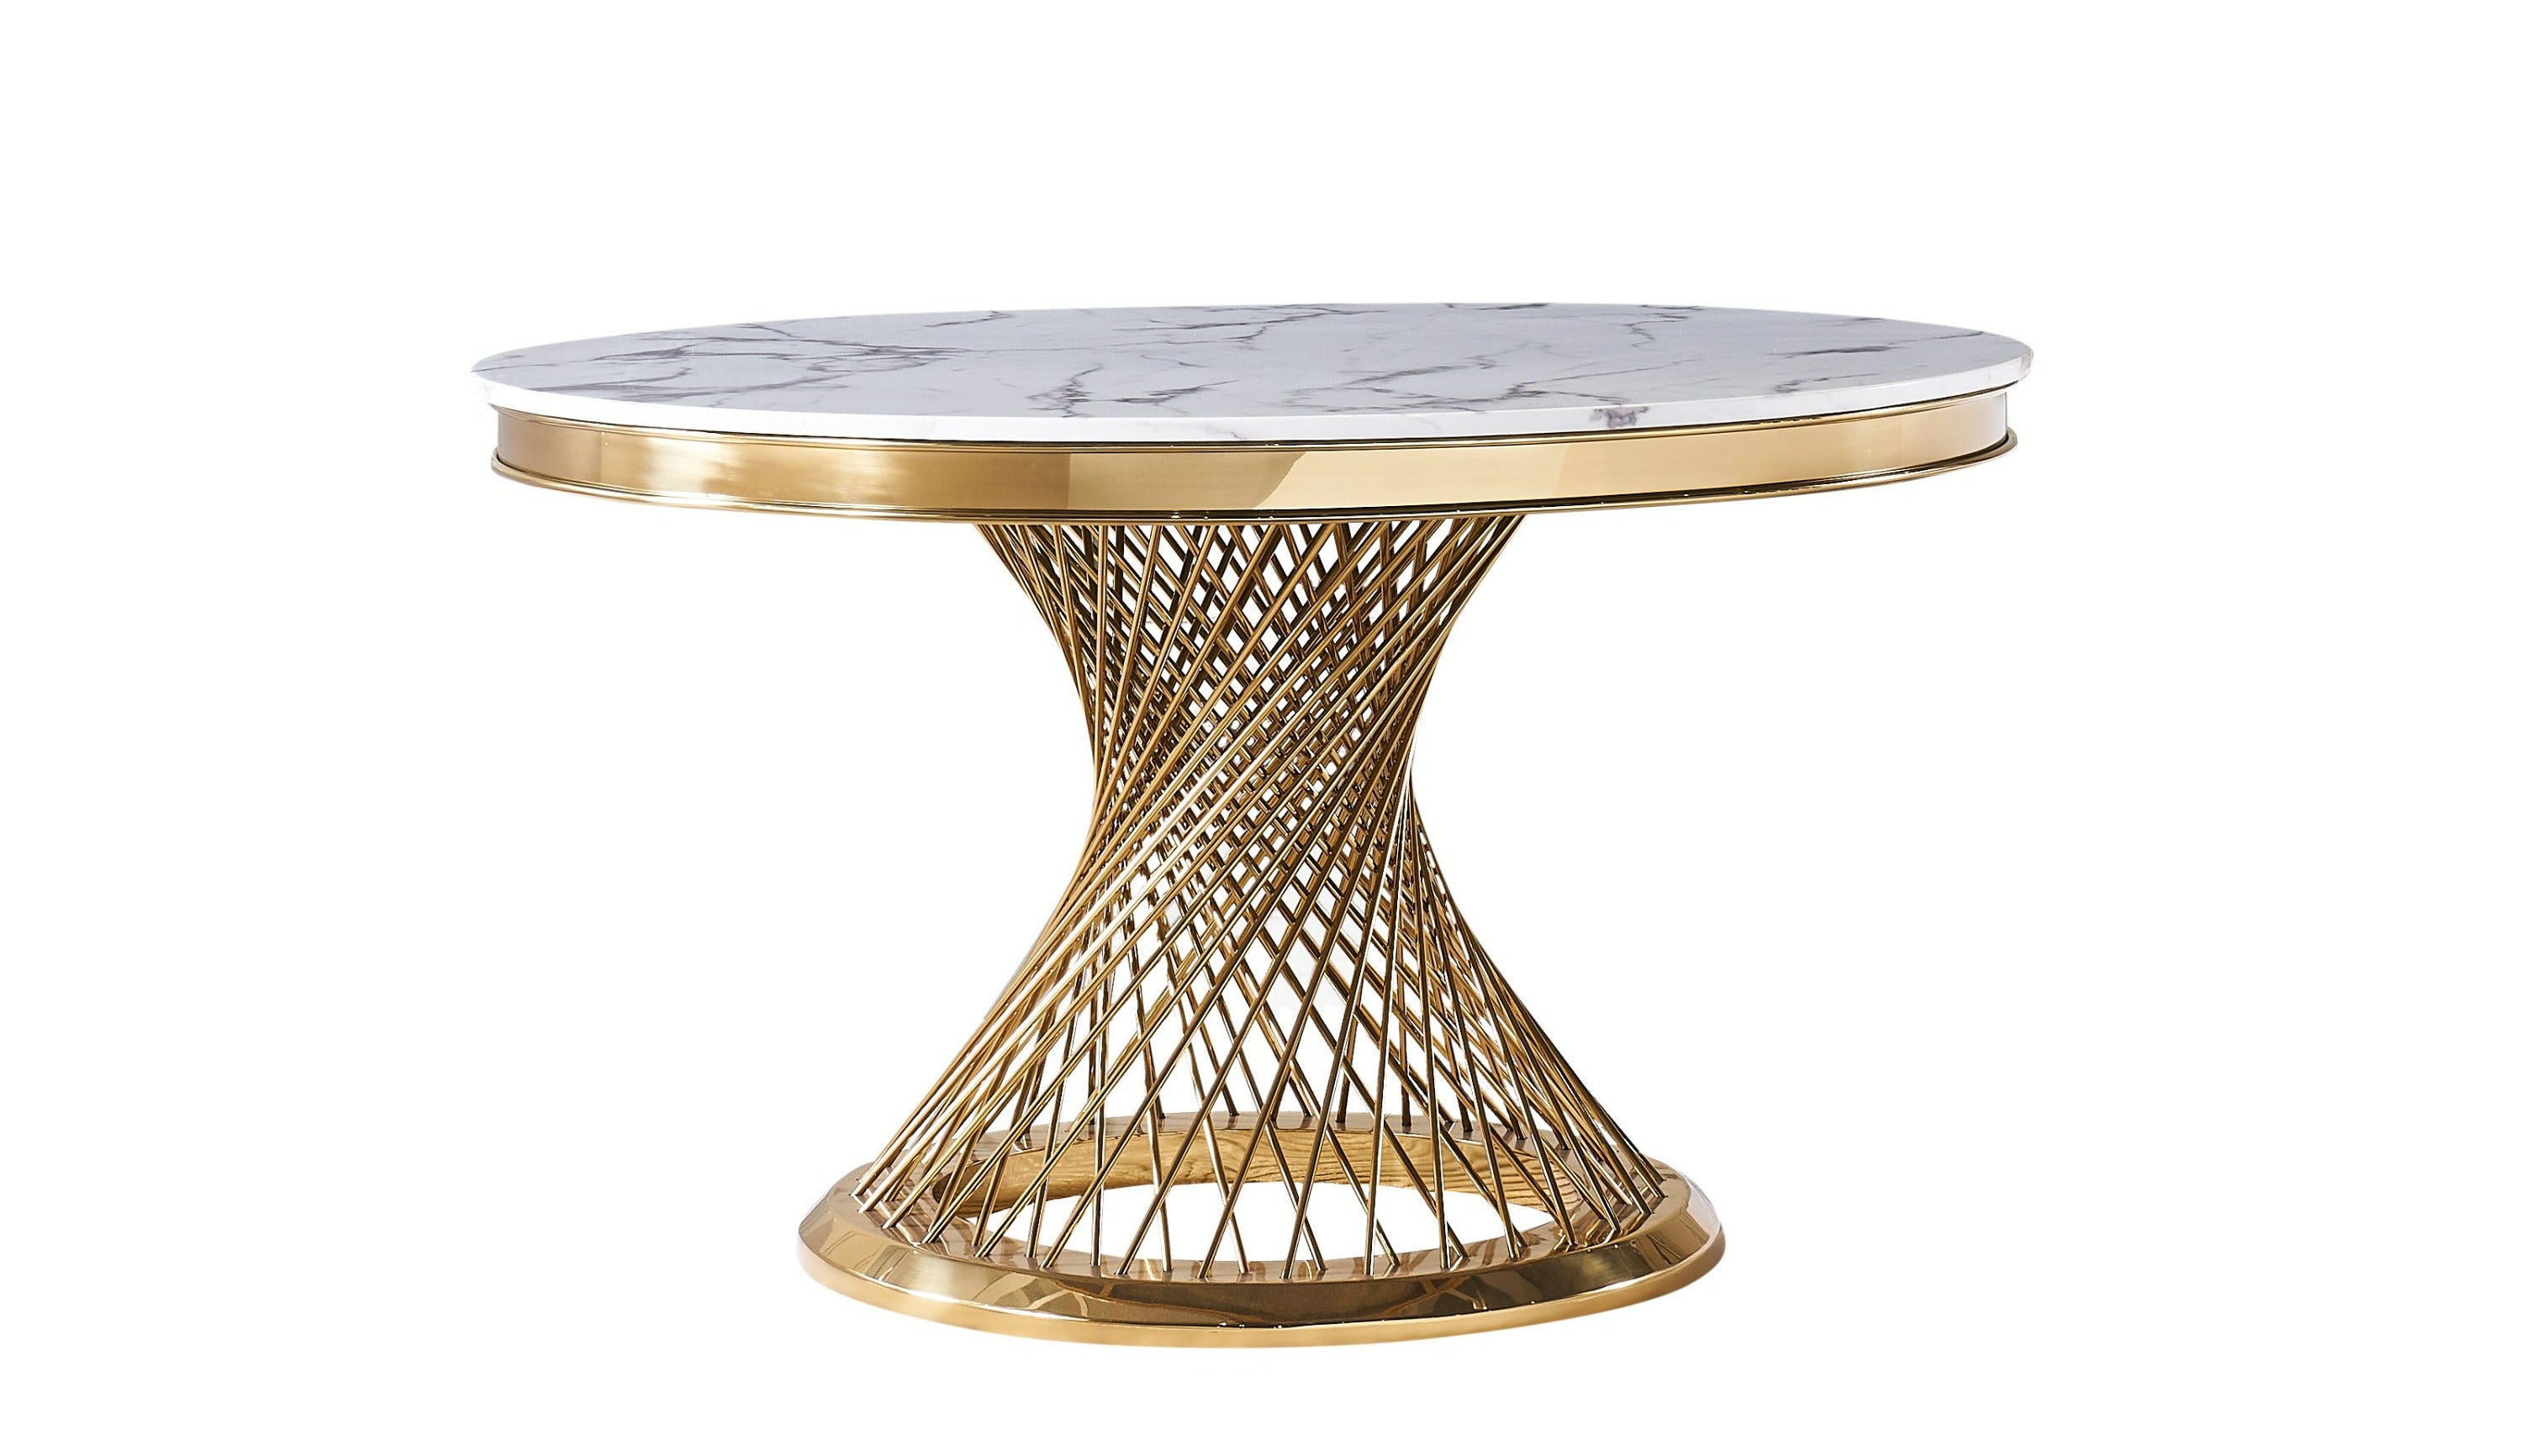 Modrest Potter - Marble & Stainless Steel Round Dining Table-Dining Table-VIG-Wall2Wall Furnishings